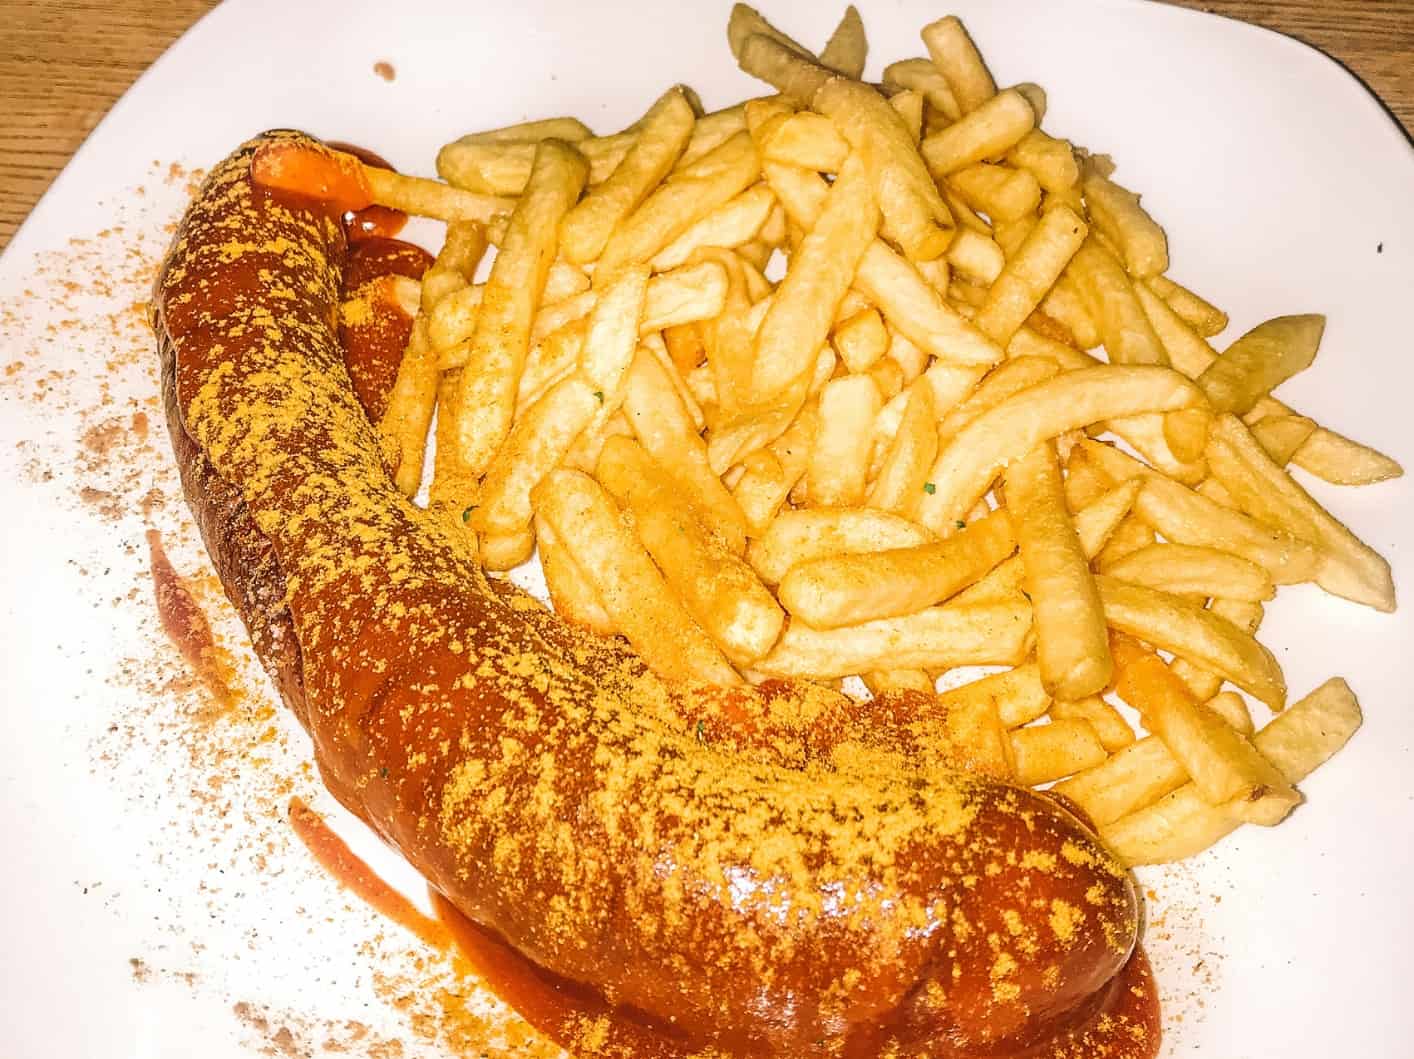 A delicious plate of currywurst and fries from Steinheil 16 – easily one of the best Bavarian restaurants in Munich 